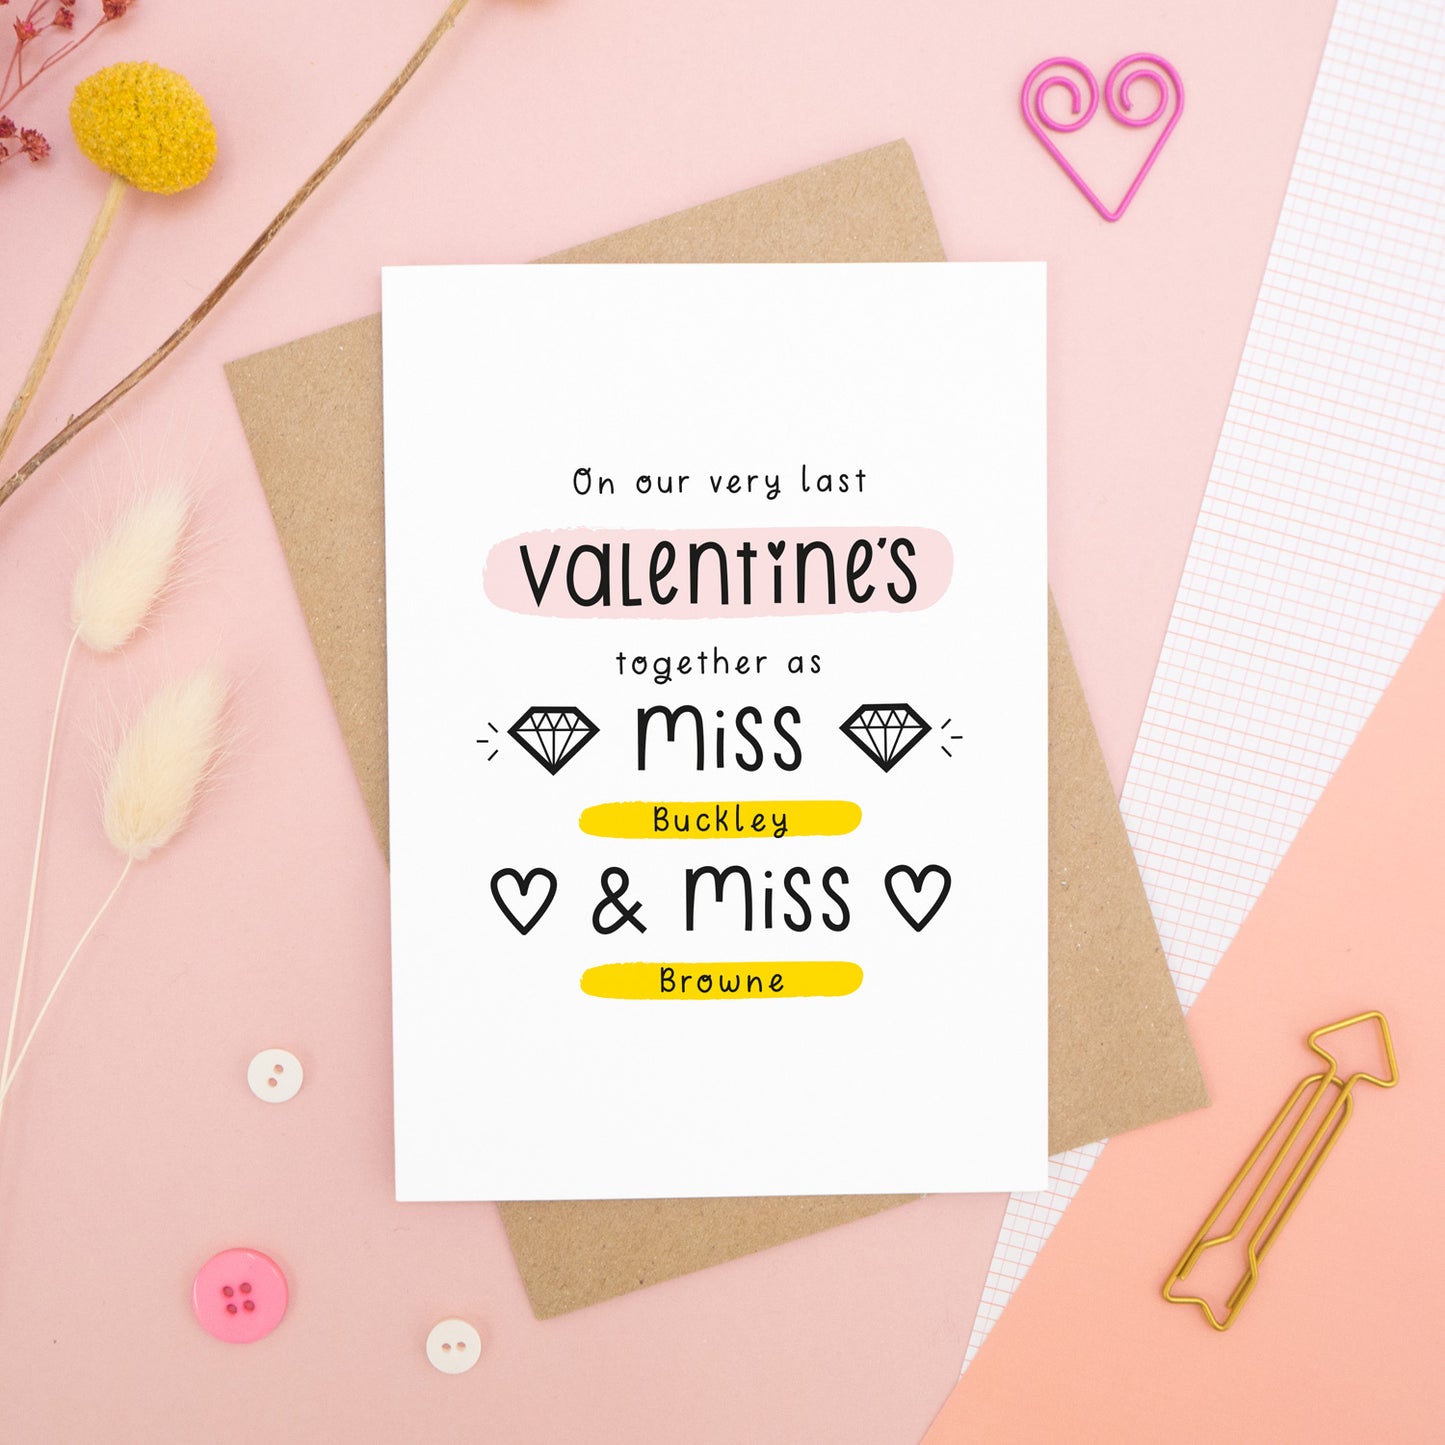 A personalised last anniversary or Valentine’s card photographed on a pink background with floral props, paper clips, and buttons. This image shows the last valentine’s option with the Miss & Miss wording. The text is black and there are pops of yellow and pink behind key words.